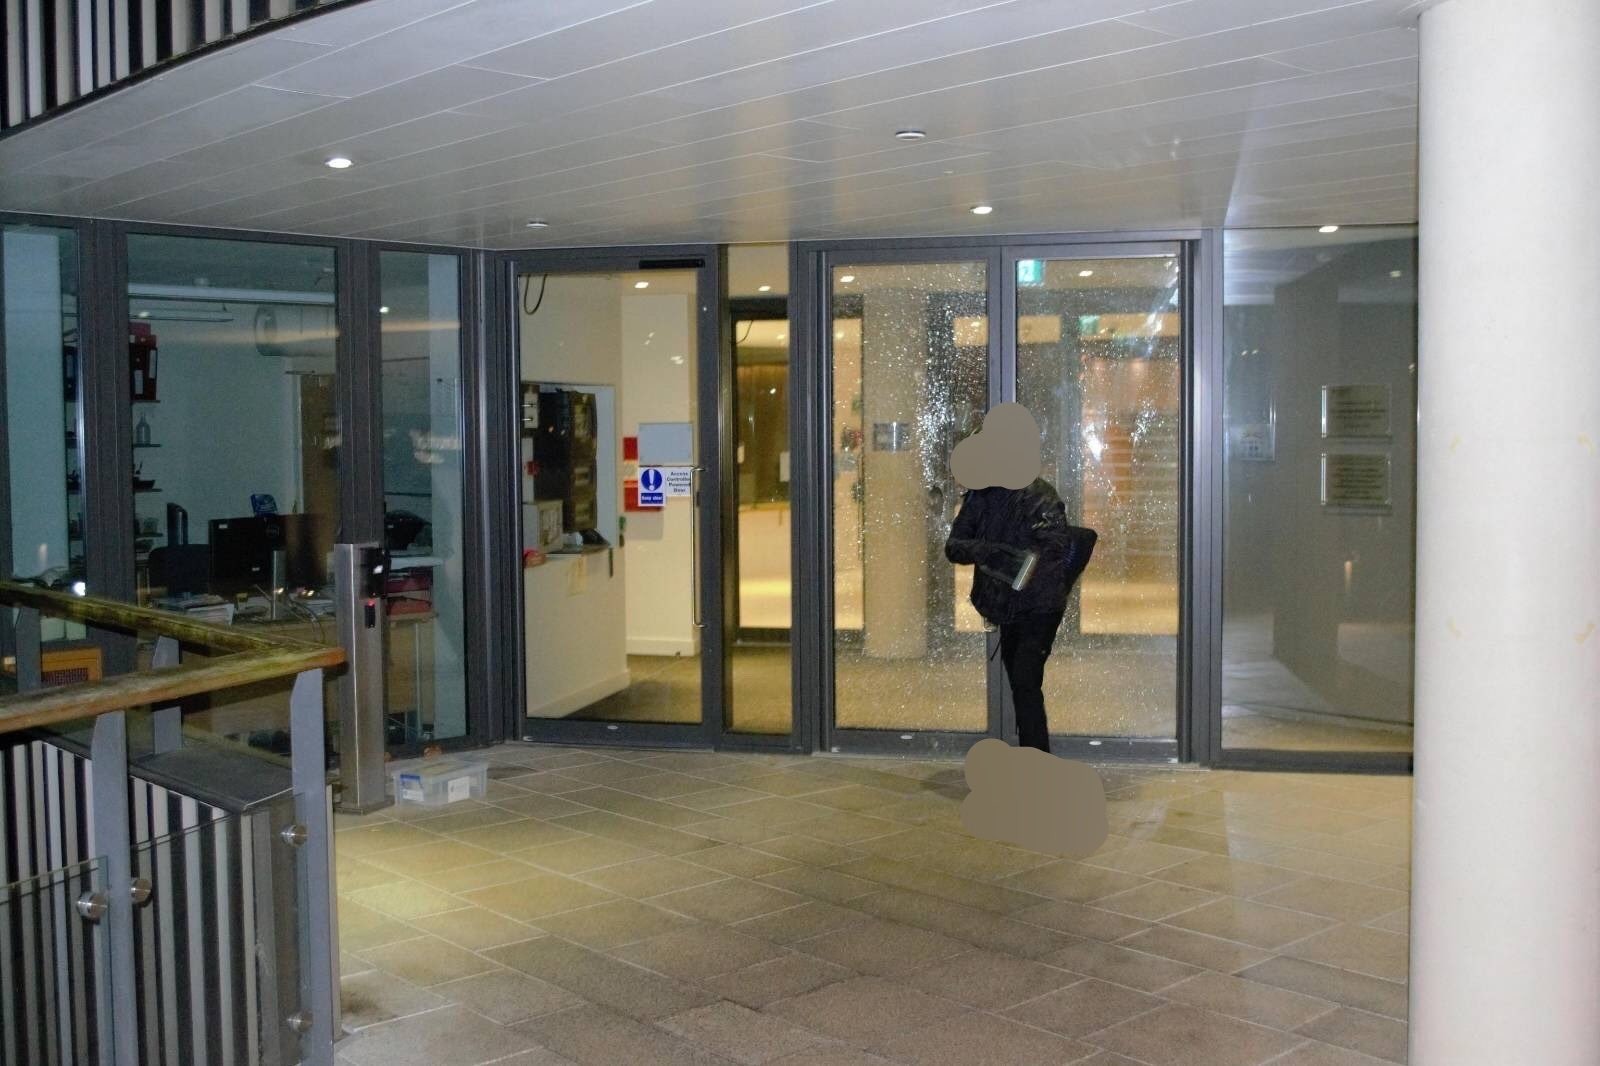 30/01/2023: Front doors smashed at University of Cambridge’s Chemical Engineering Department